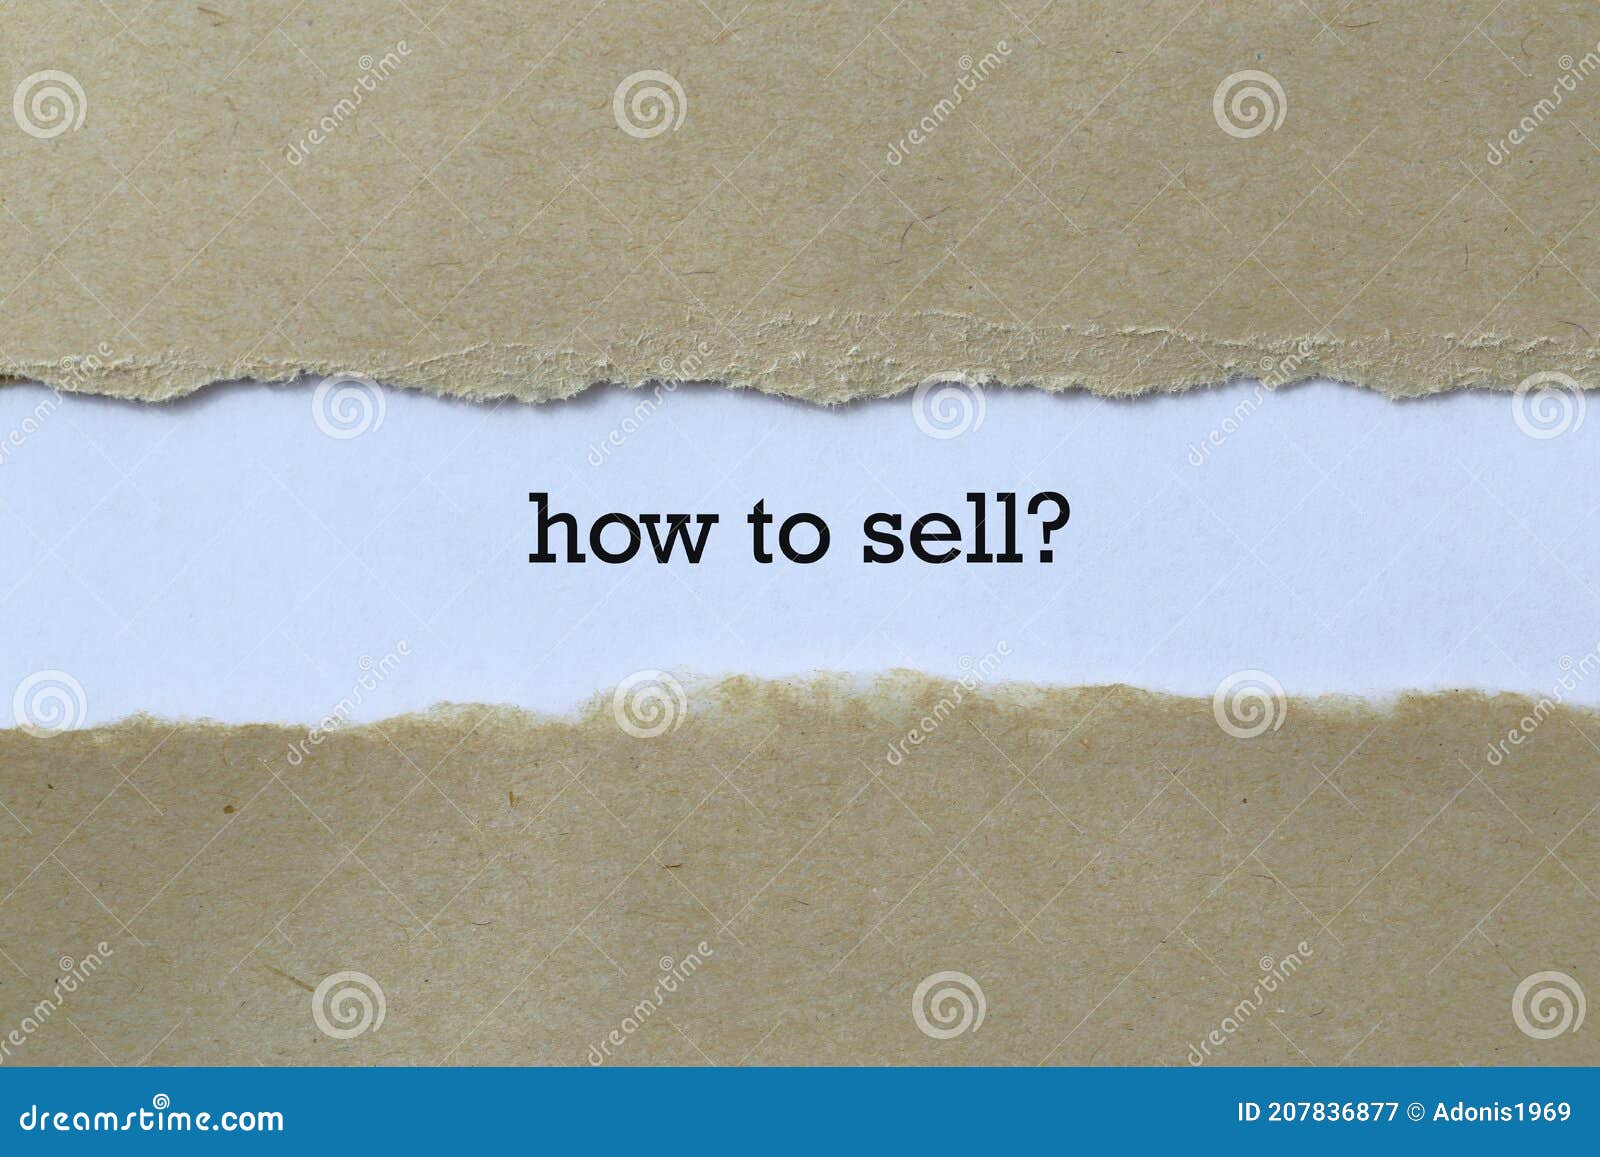 how to sell on paper